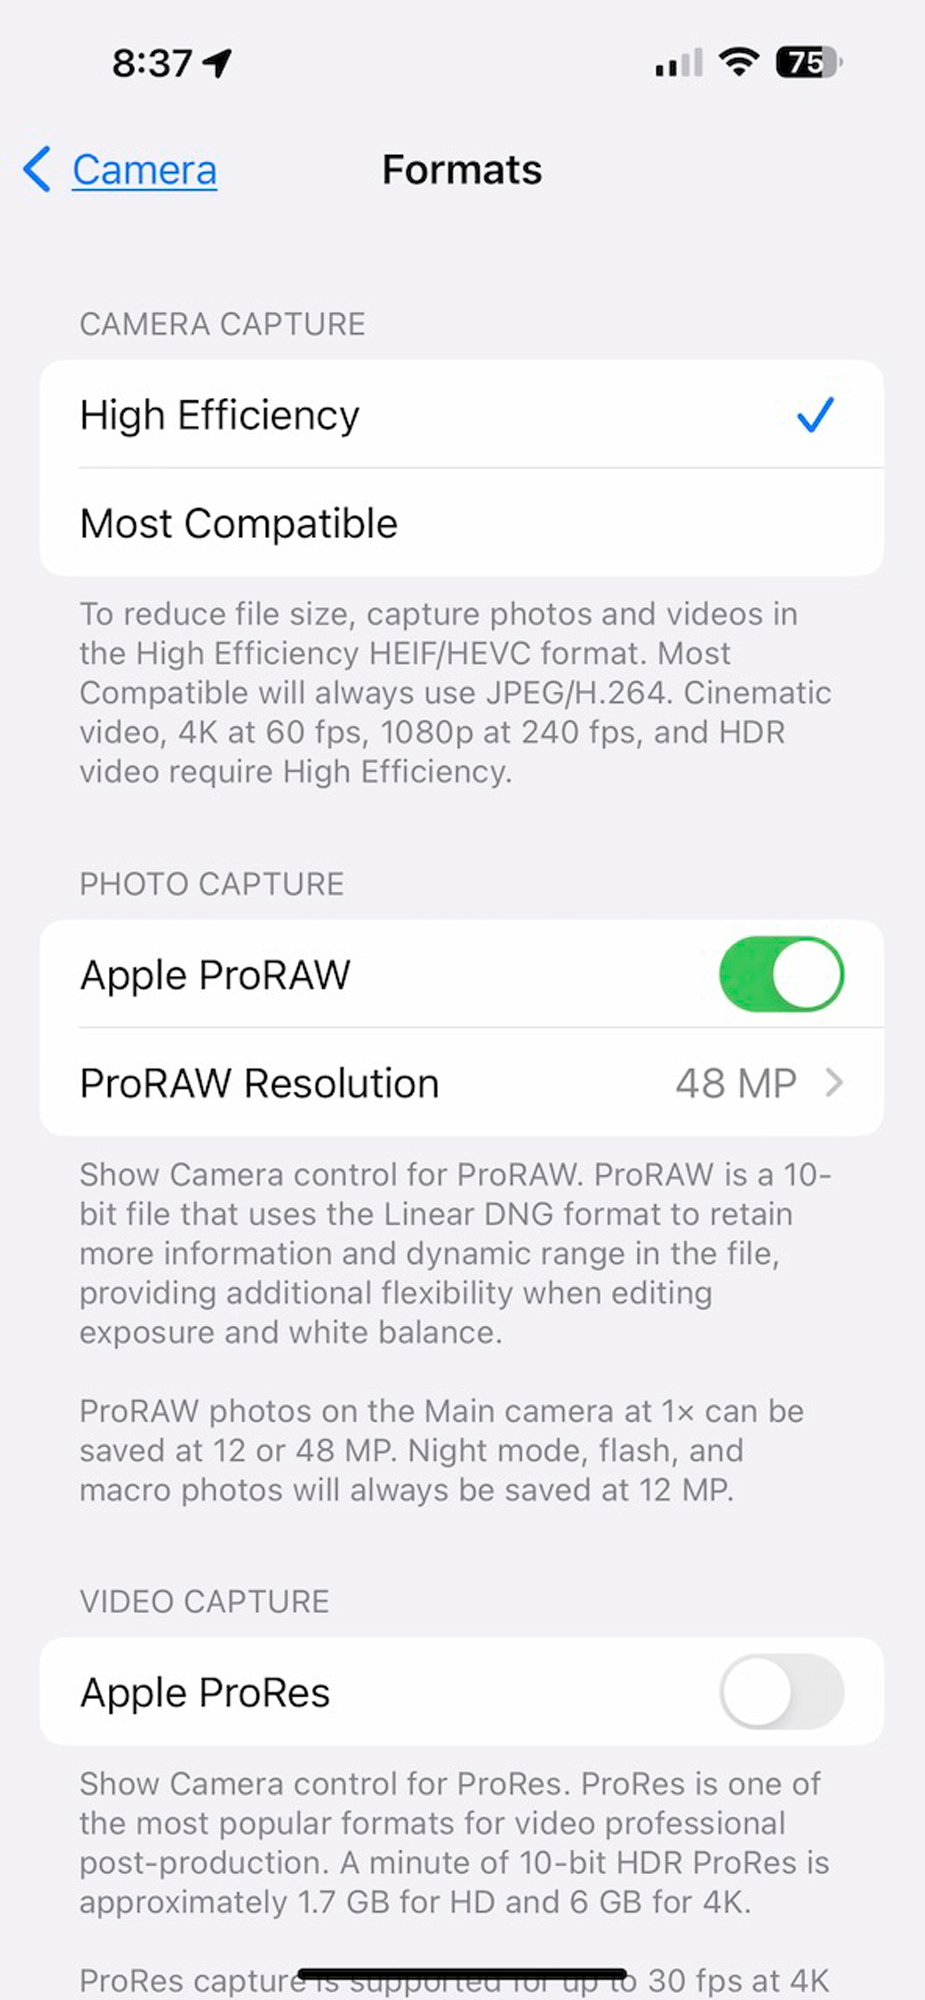 This is how you set your iPhone to shoot RAW files. Remember you must select RAW in the camera viewfinder screen to capture the image as RAW.